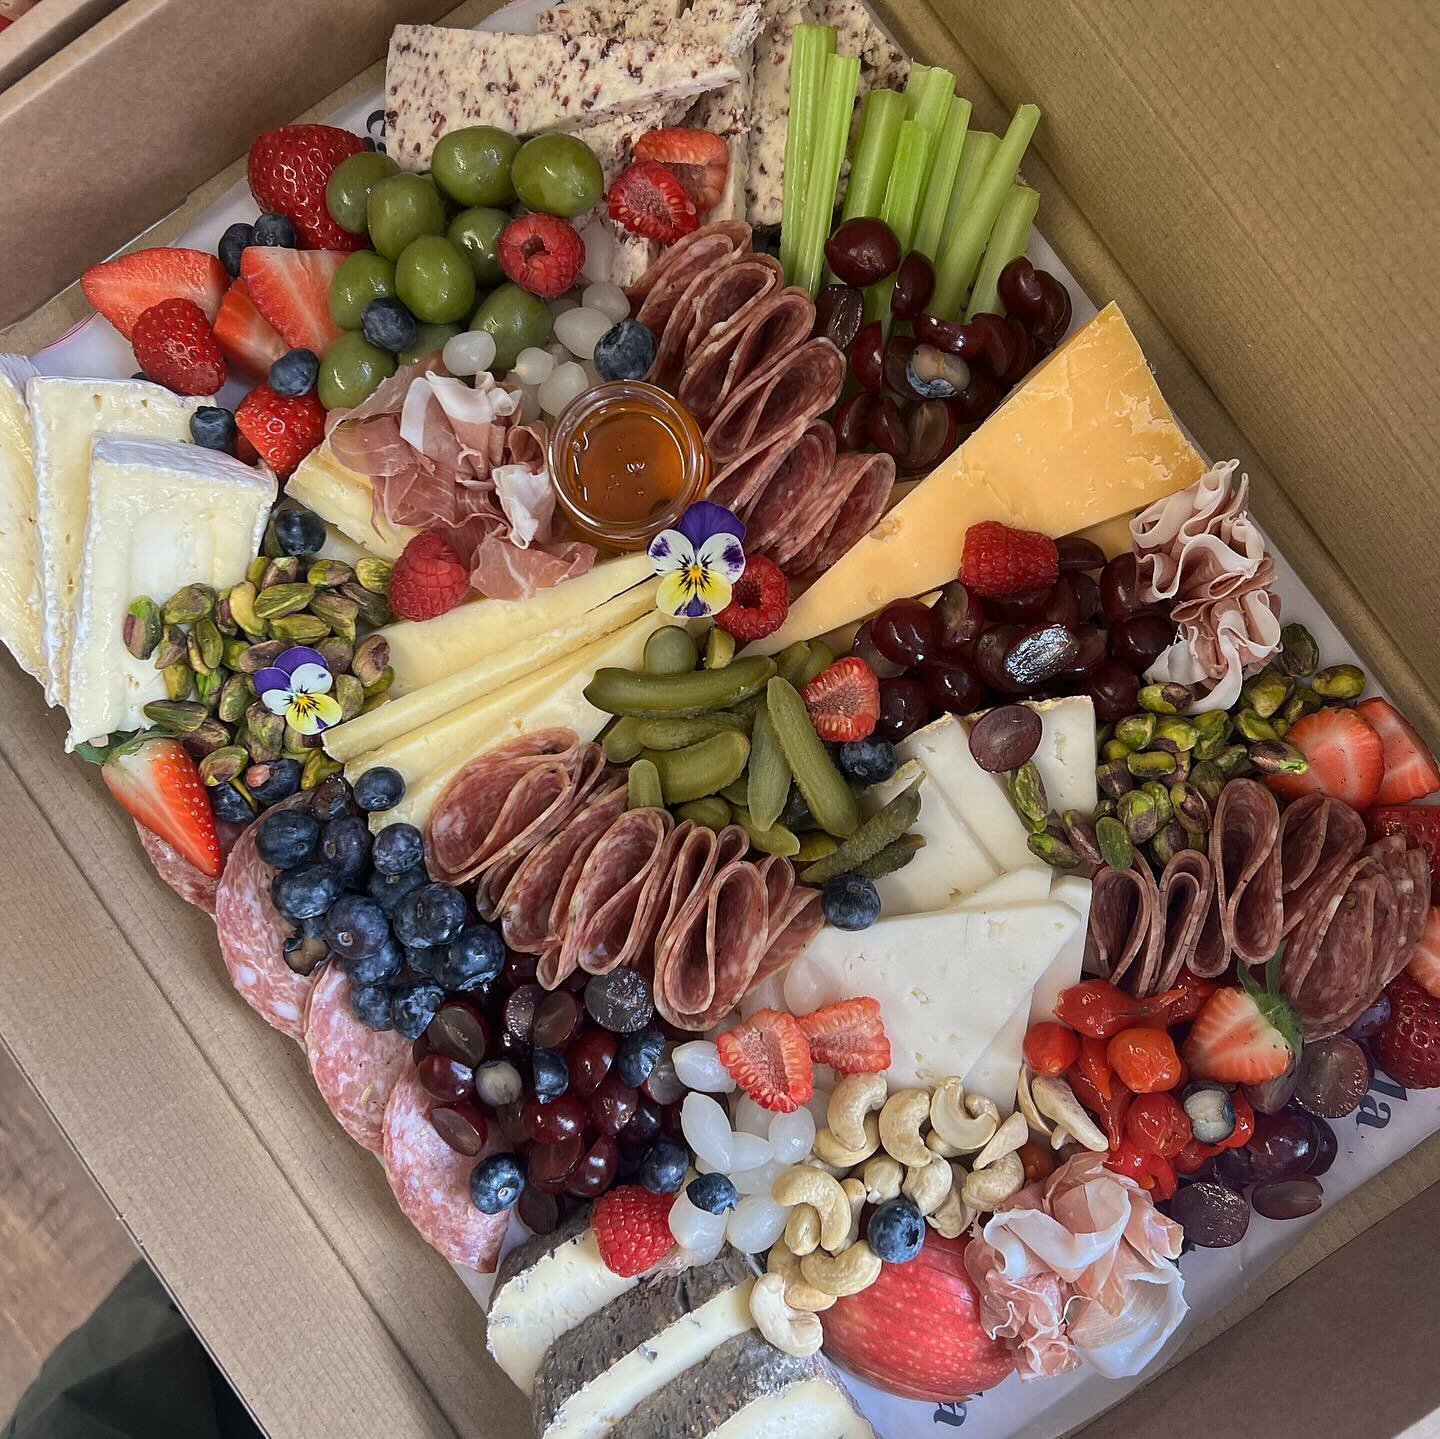 Classic Cheese &amp; Charcuterie Platters🫶🌼🍓 ~ if you&rsquo;re new here, then this is a note to say that we offer WAY more than just chocolate brownies!✨ We&rsquo;ve grown over the last 4 years to now specialise in both sweet &amp; savoury gifting